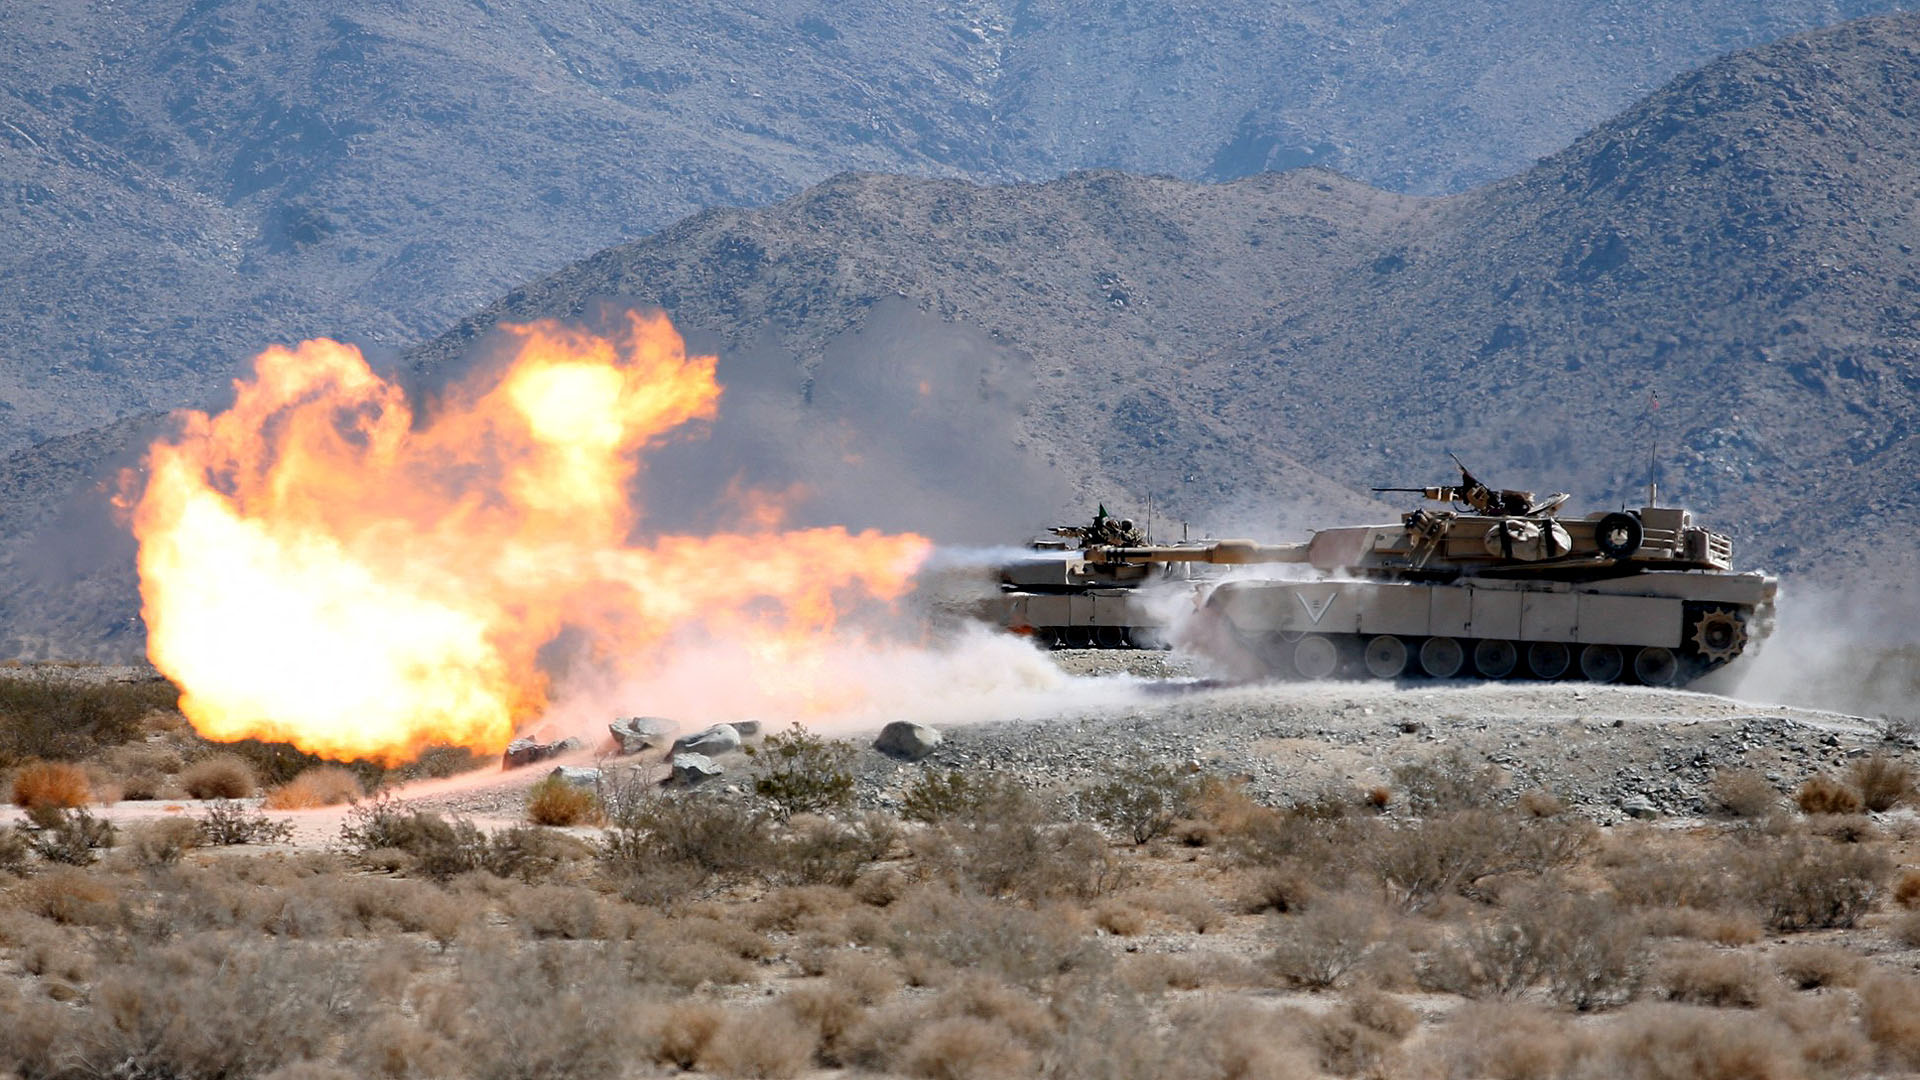 US to sell Morocco 162 Abrams tank upgrades for an estimated cost of $1.259 billion